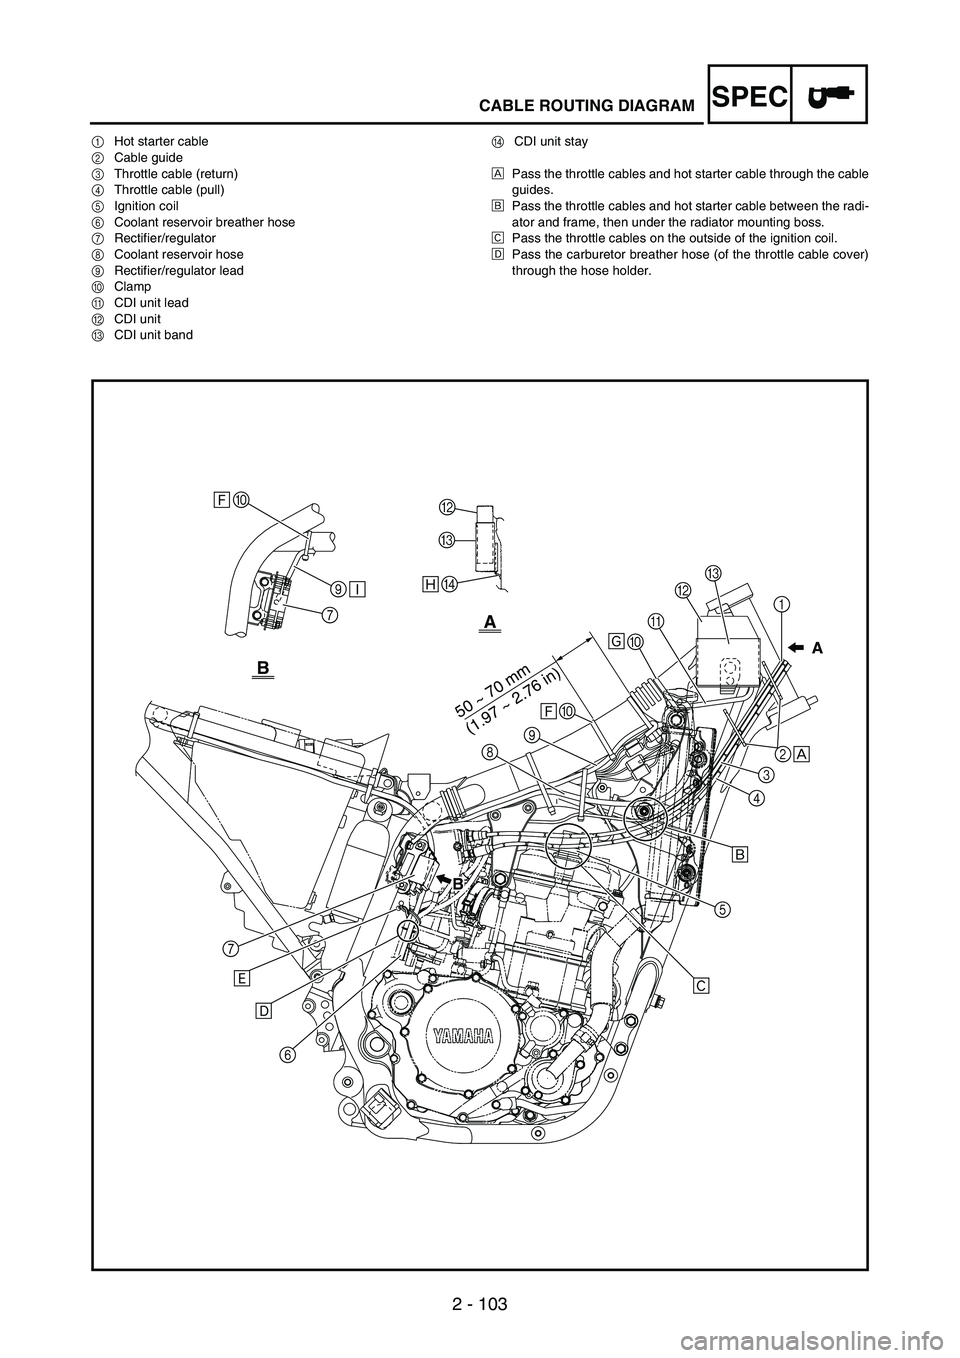 YAMAHA WR 250F 2004  Betriebsanleitungen (in German) SPEC
2 - 103
CABLE ROUTING DIAGRAM
1Hot starter cable
2Cable guide
3Throttle cable (return)
4Throttle cable (pull)
5Ignition coil
6Coolant reservoir breather hose
7Rectifier/regulator
8Coolant reservo